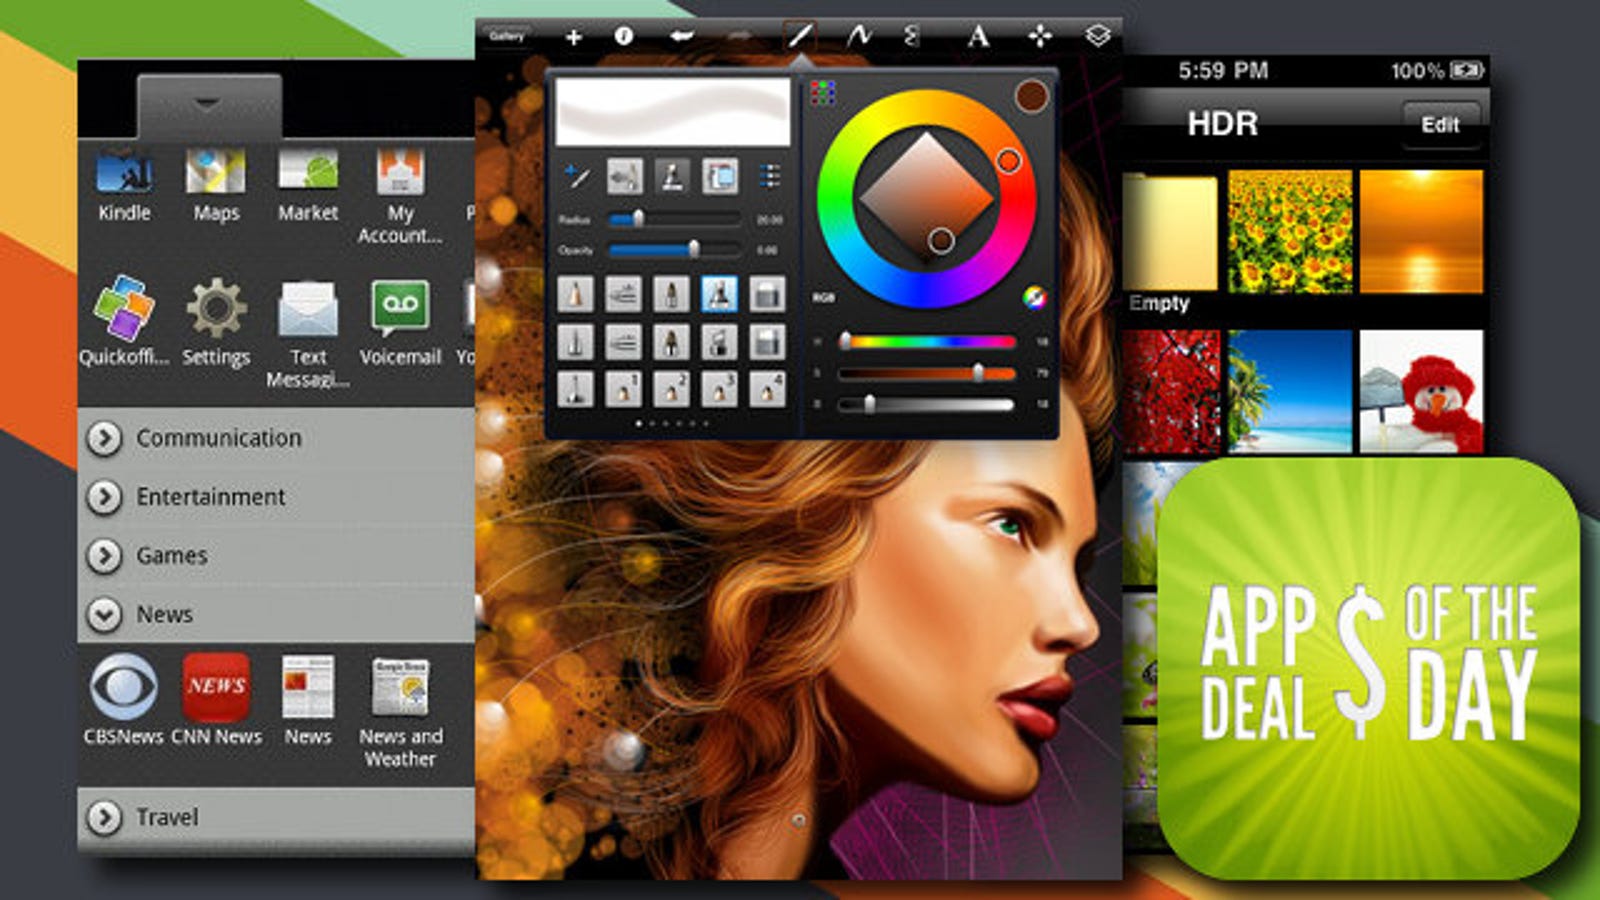 Daily App Deals: Sketch and Paint on Your iPad with SketchBook Pro, Now